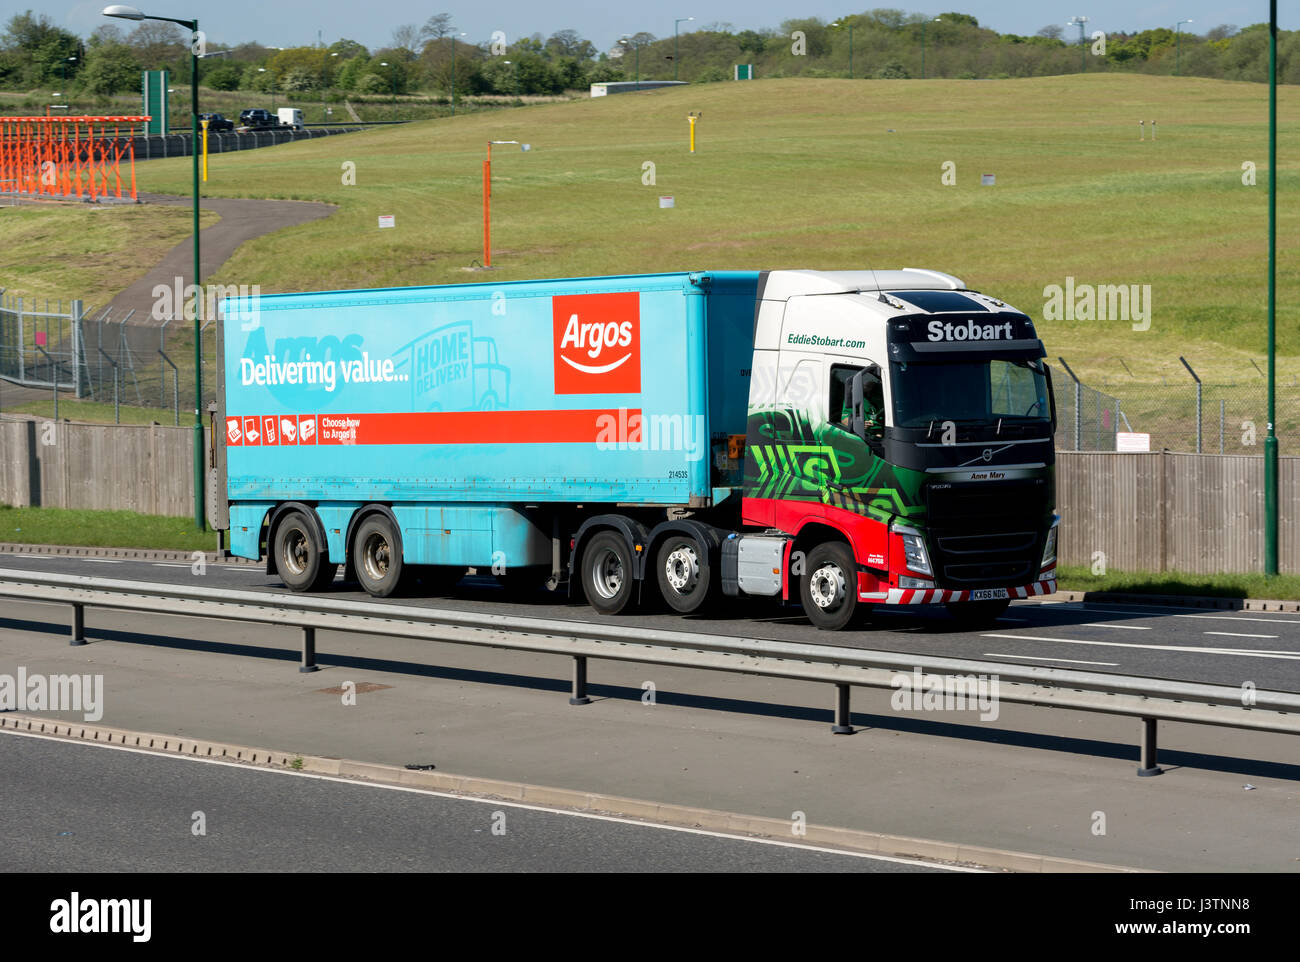 A Stobart/Argos lorry on the A45 road, West Midlands, England, UK Stock Photo